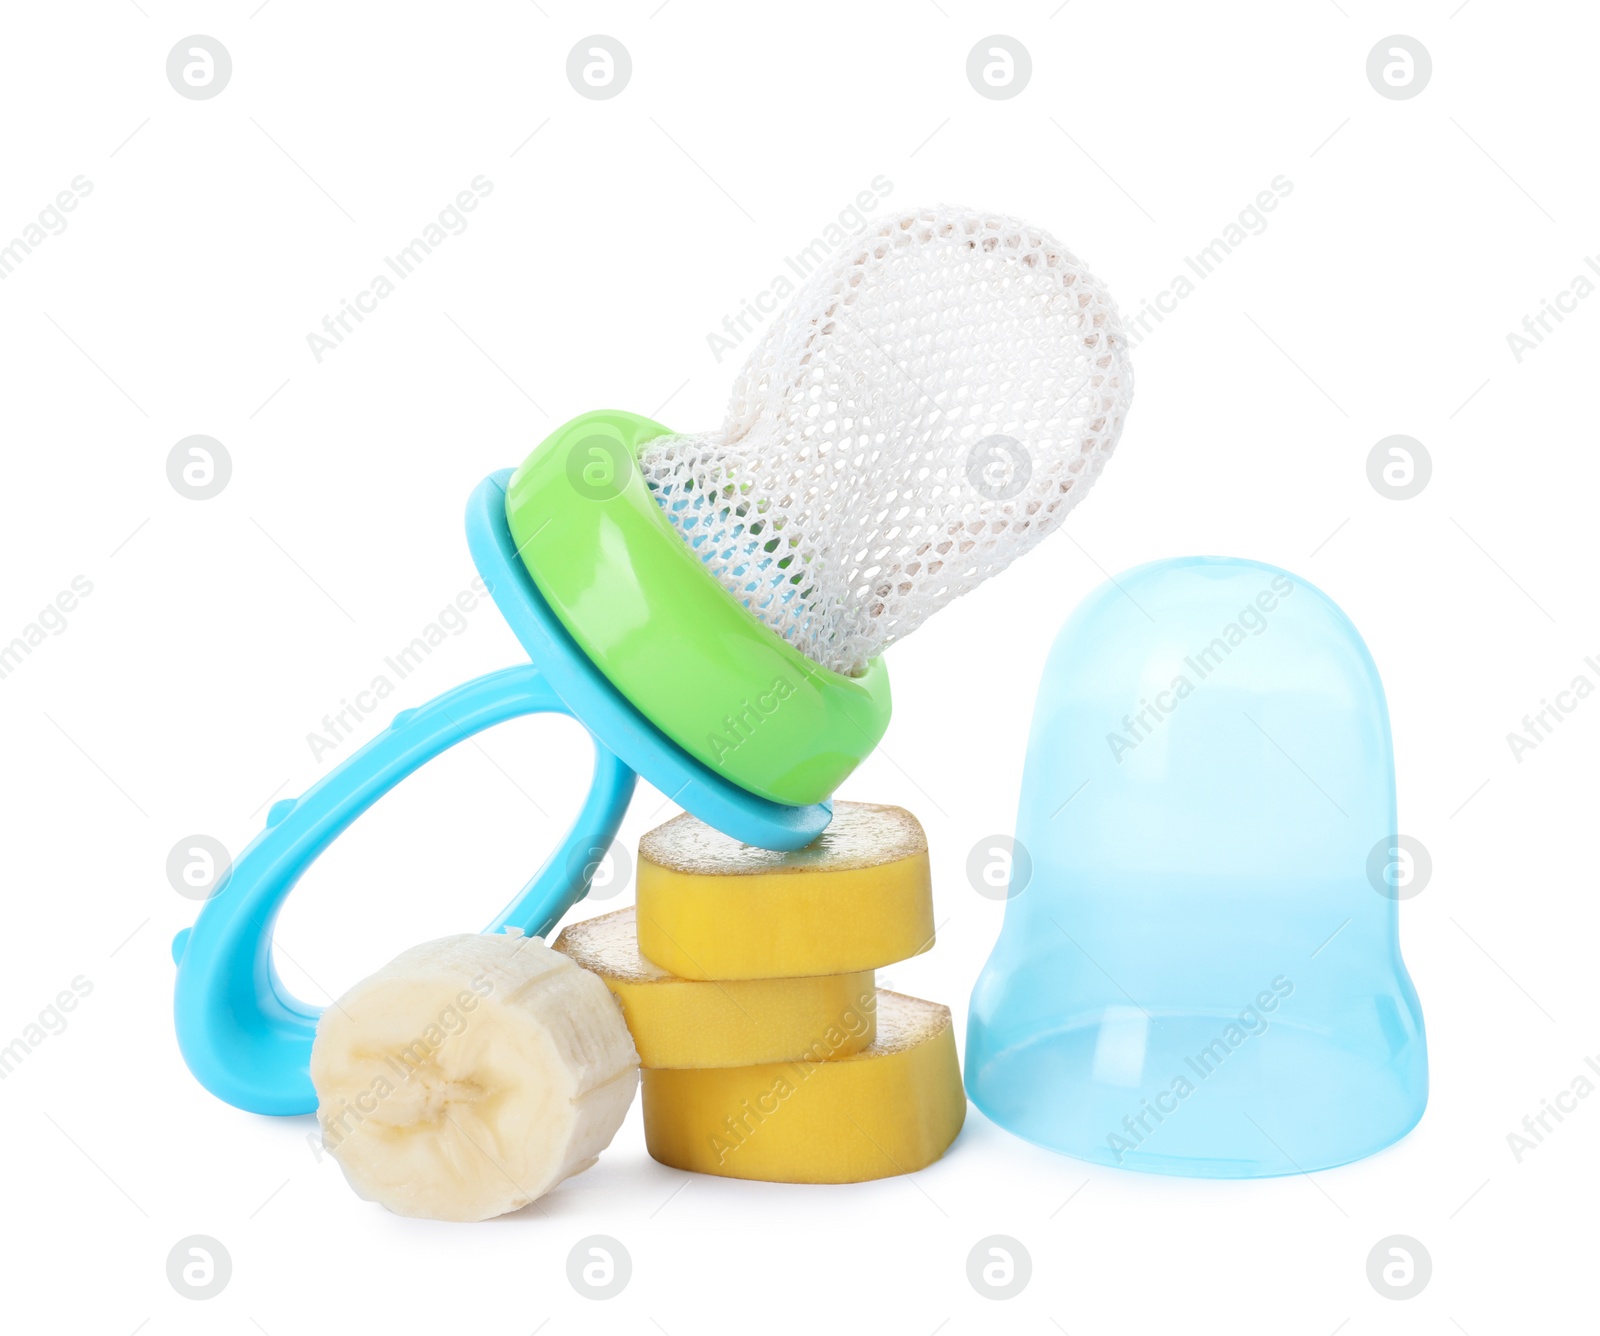 Photo of Empty nibbler and cut banana on white background. Baby feeder